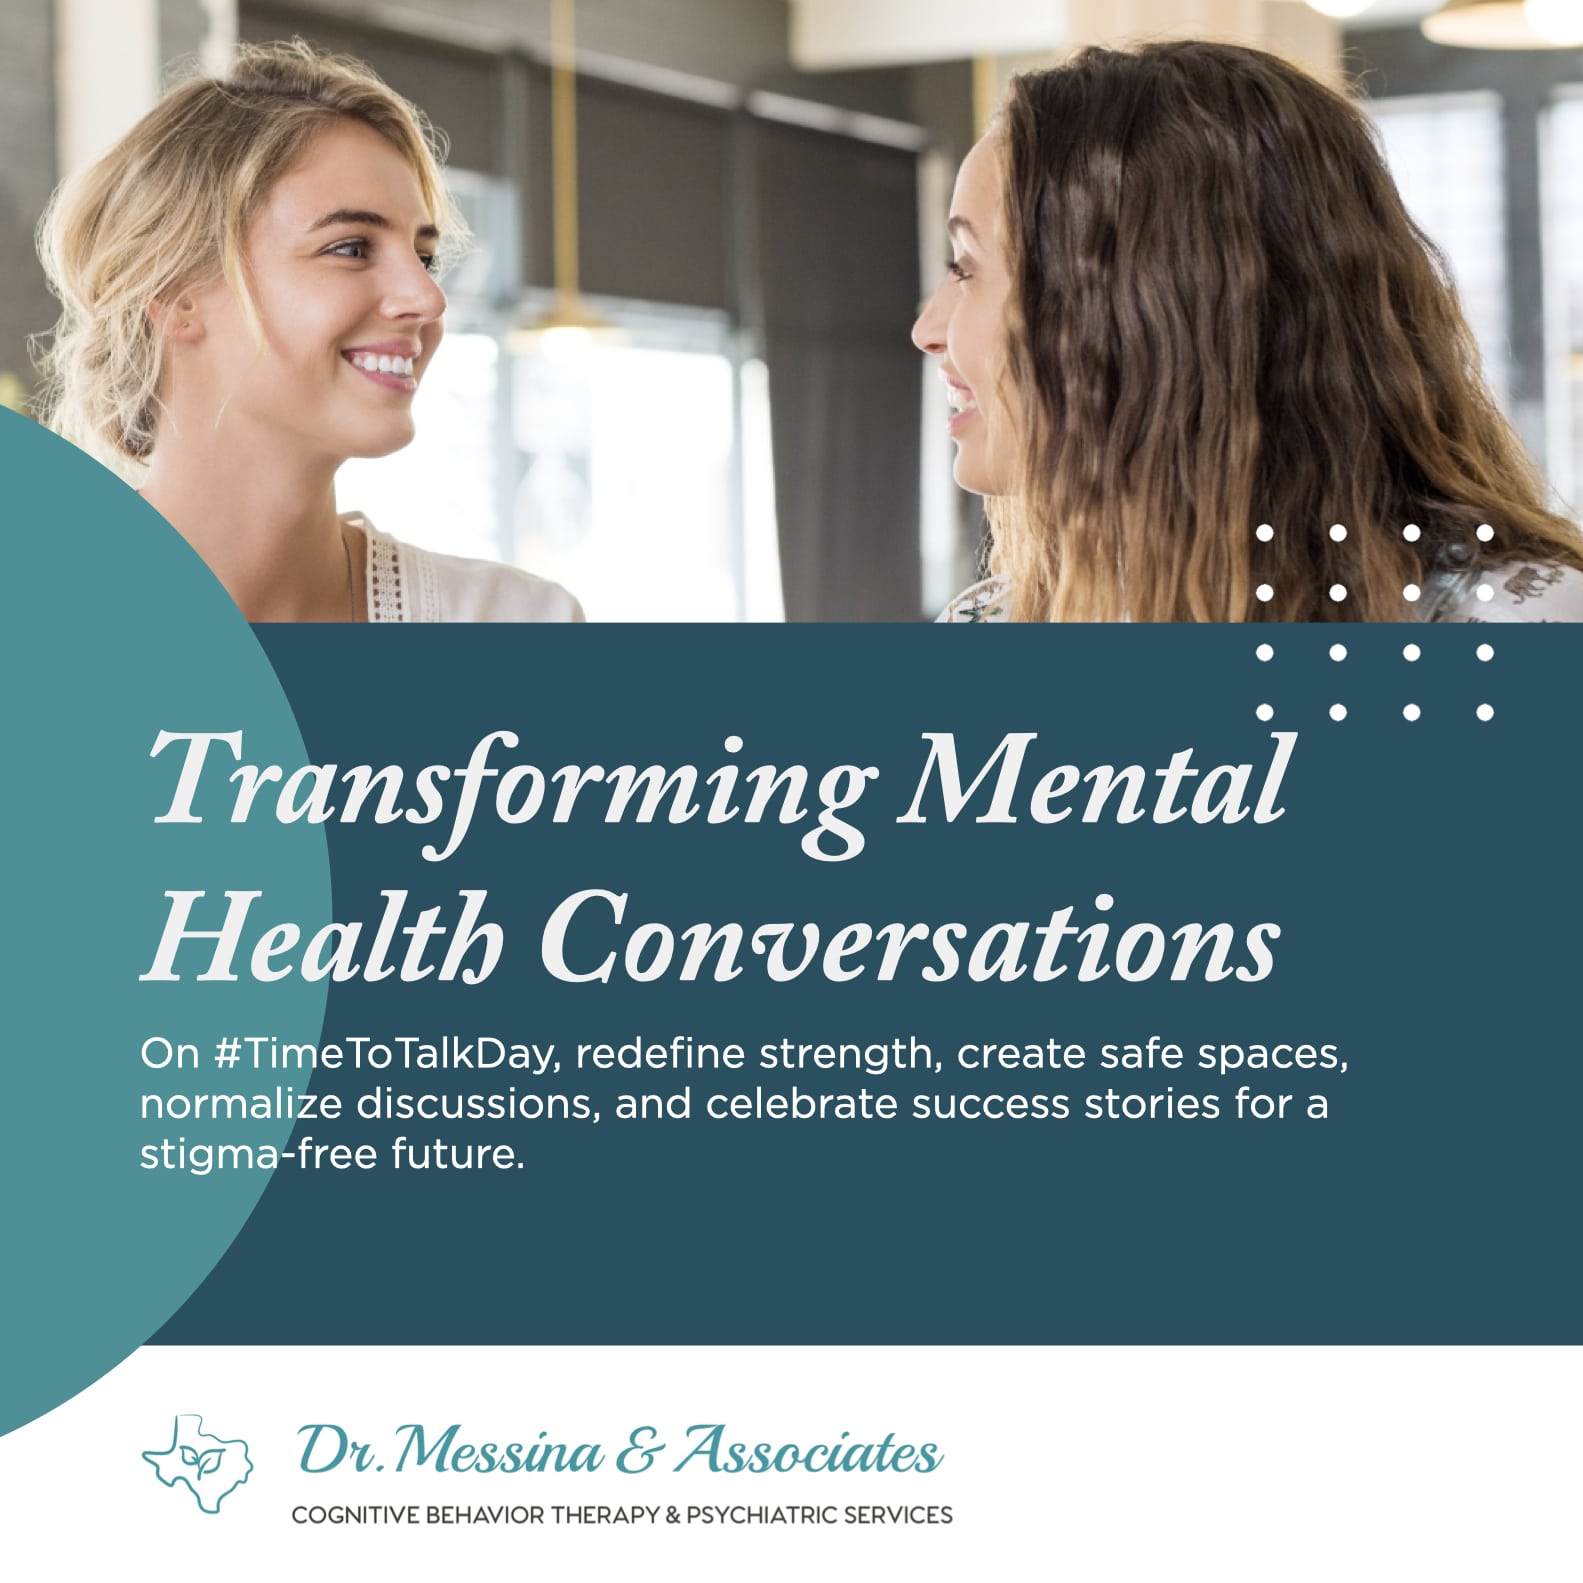 Two women engaging in a narrative, transforming mental health conversations.